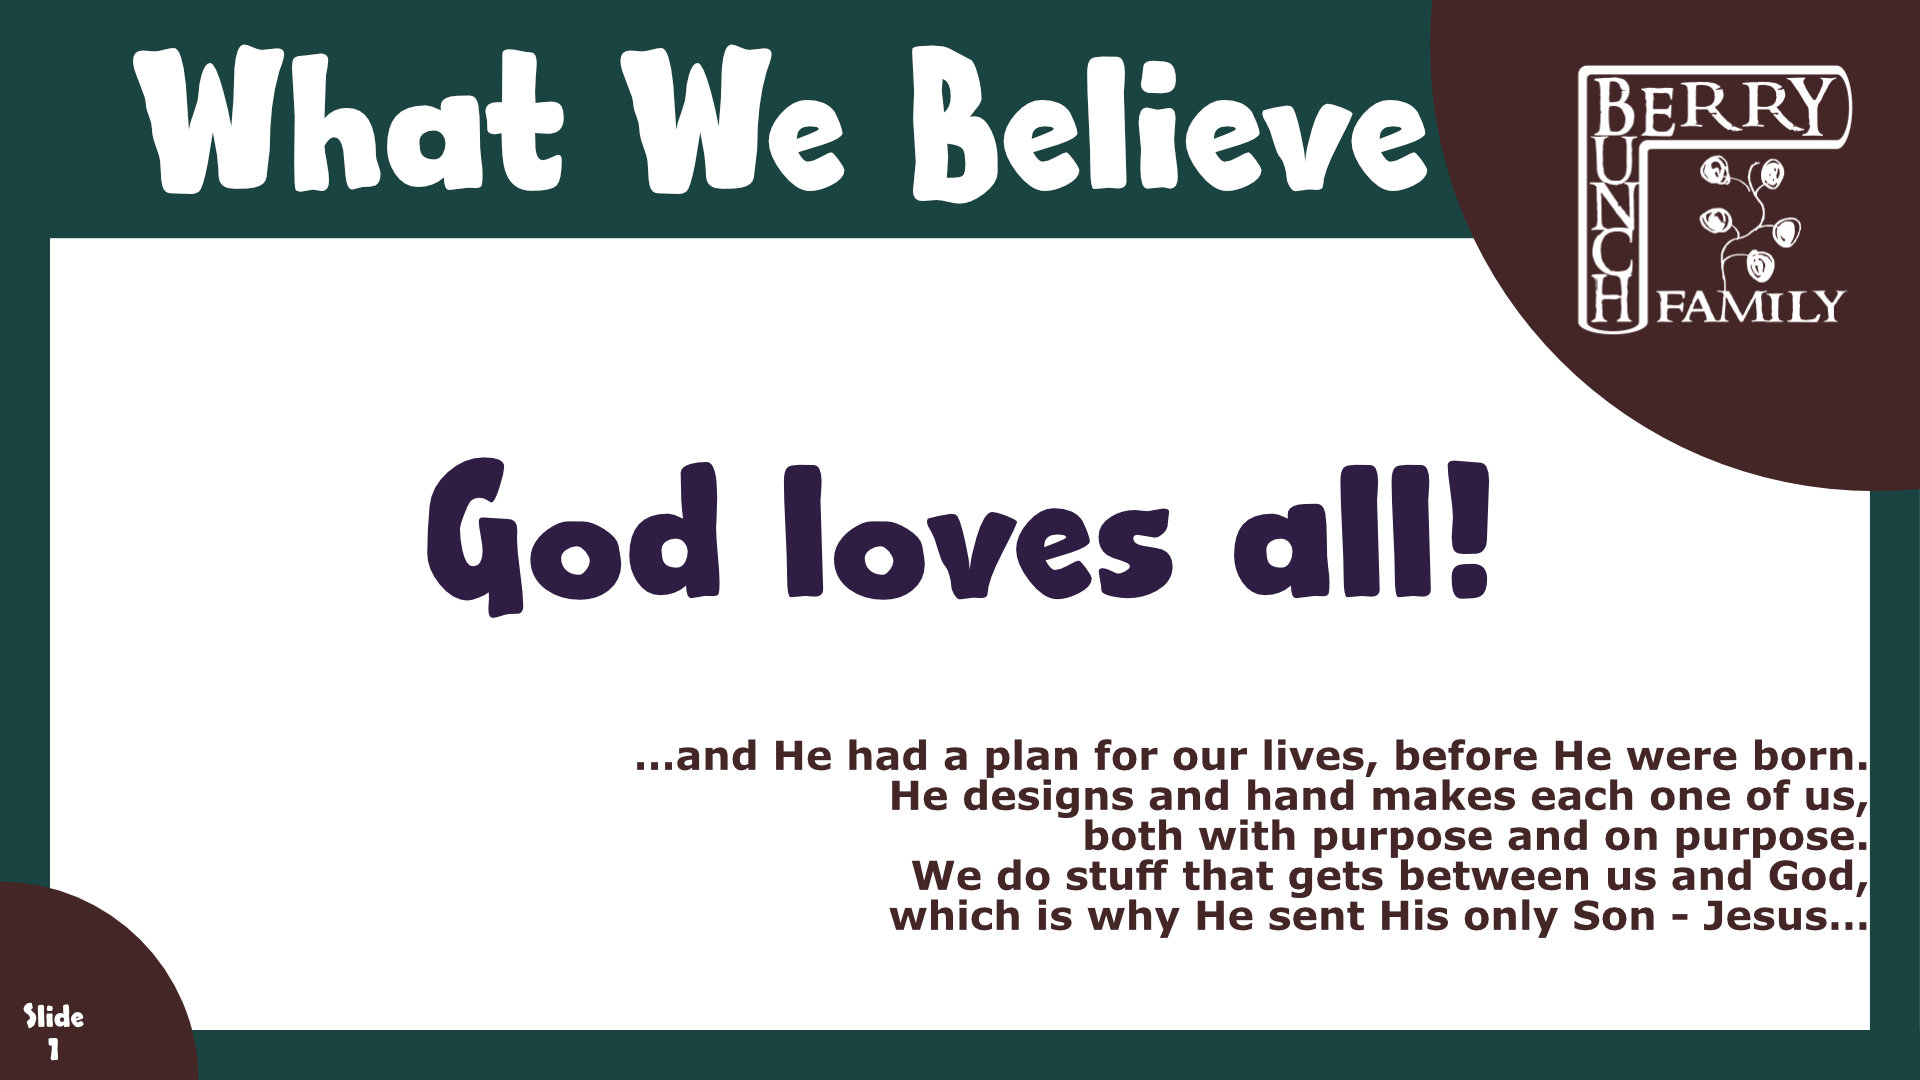 01 What-We-Believe-image 1